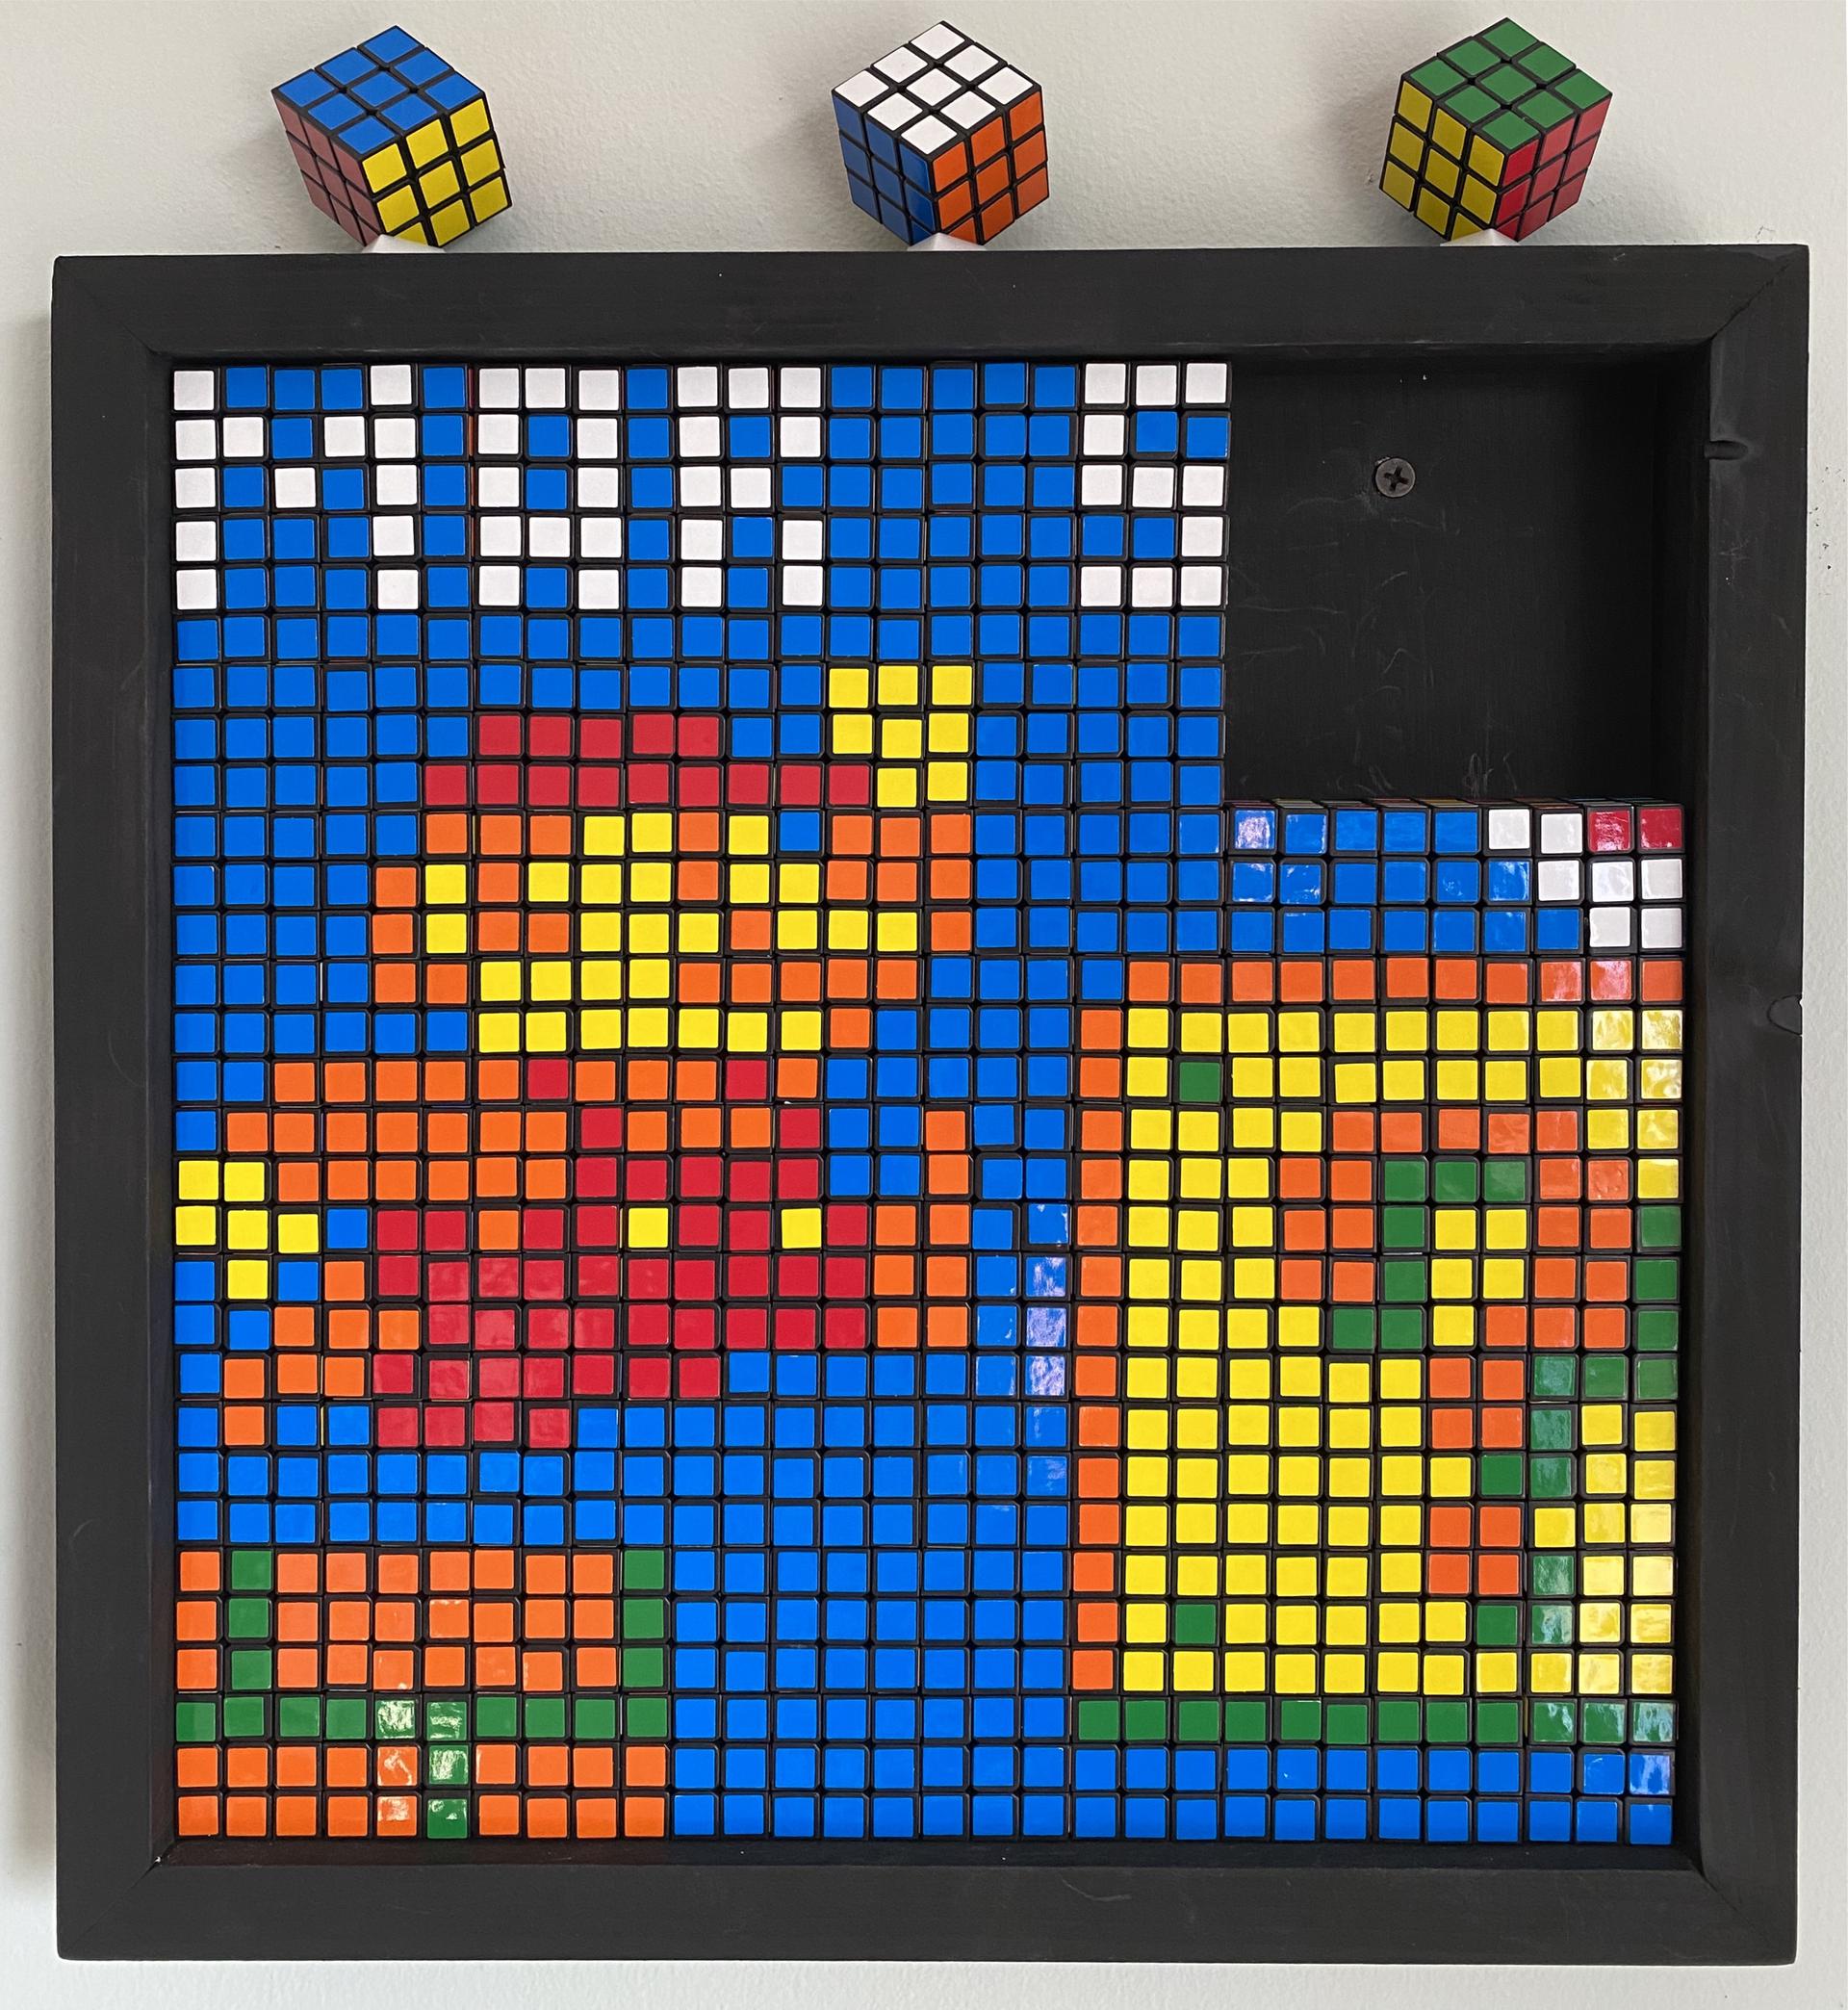 Partially built Rubik's cubes as pixel art of Super Mario jumping up to a question block for Mar 05